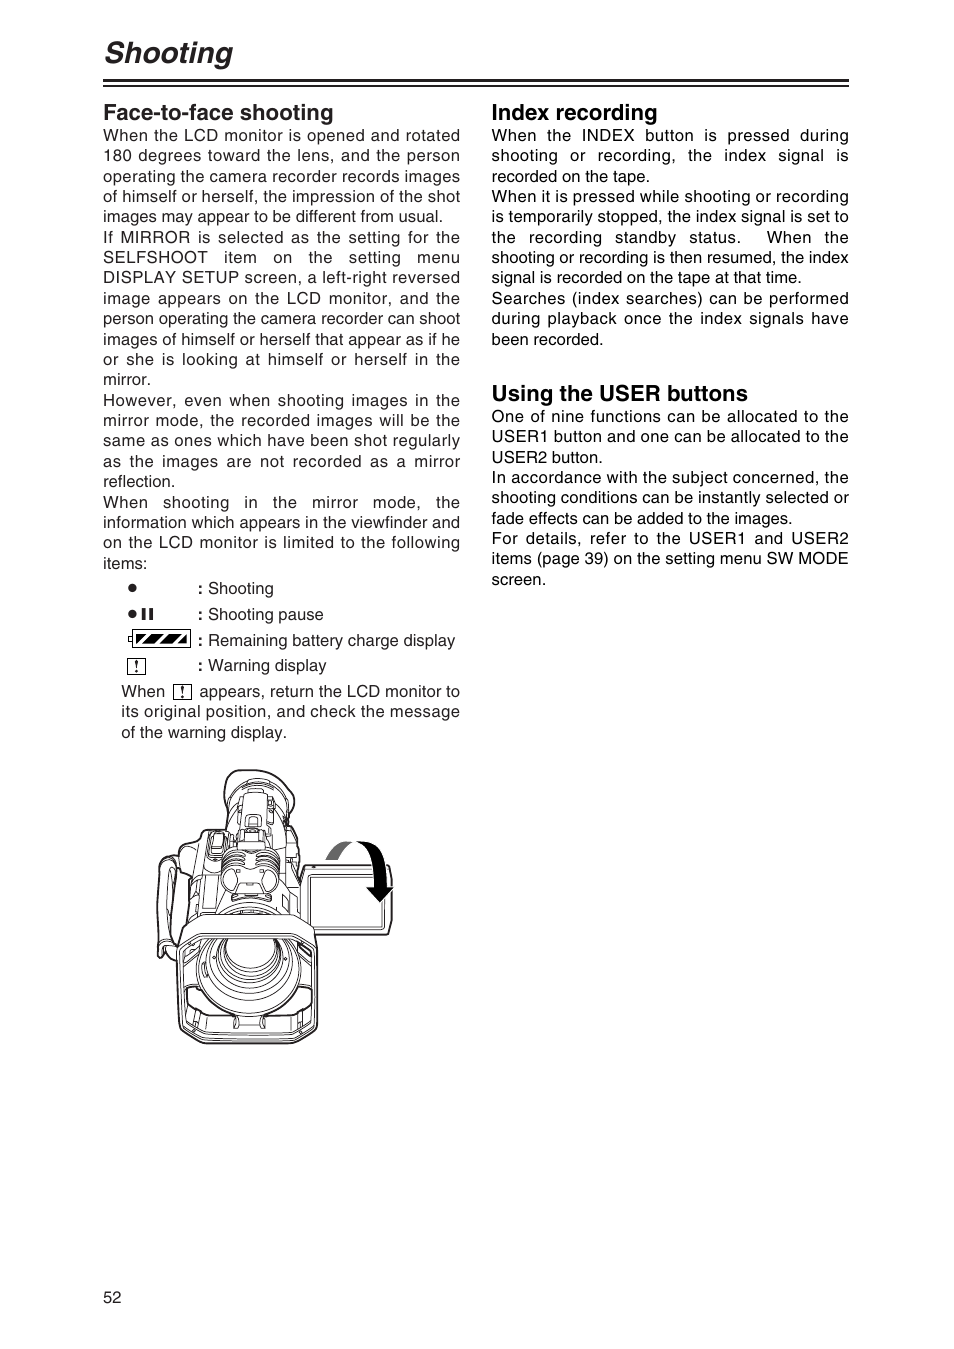 Face-to-face shooting, Index recording, Using the user buttons | Shooting | Panasonic AG-DVC80 User Manual | Page 52 / 62